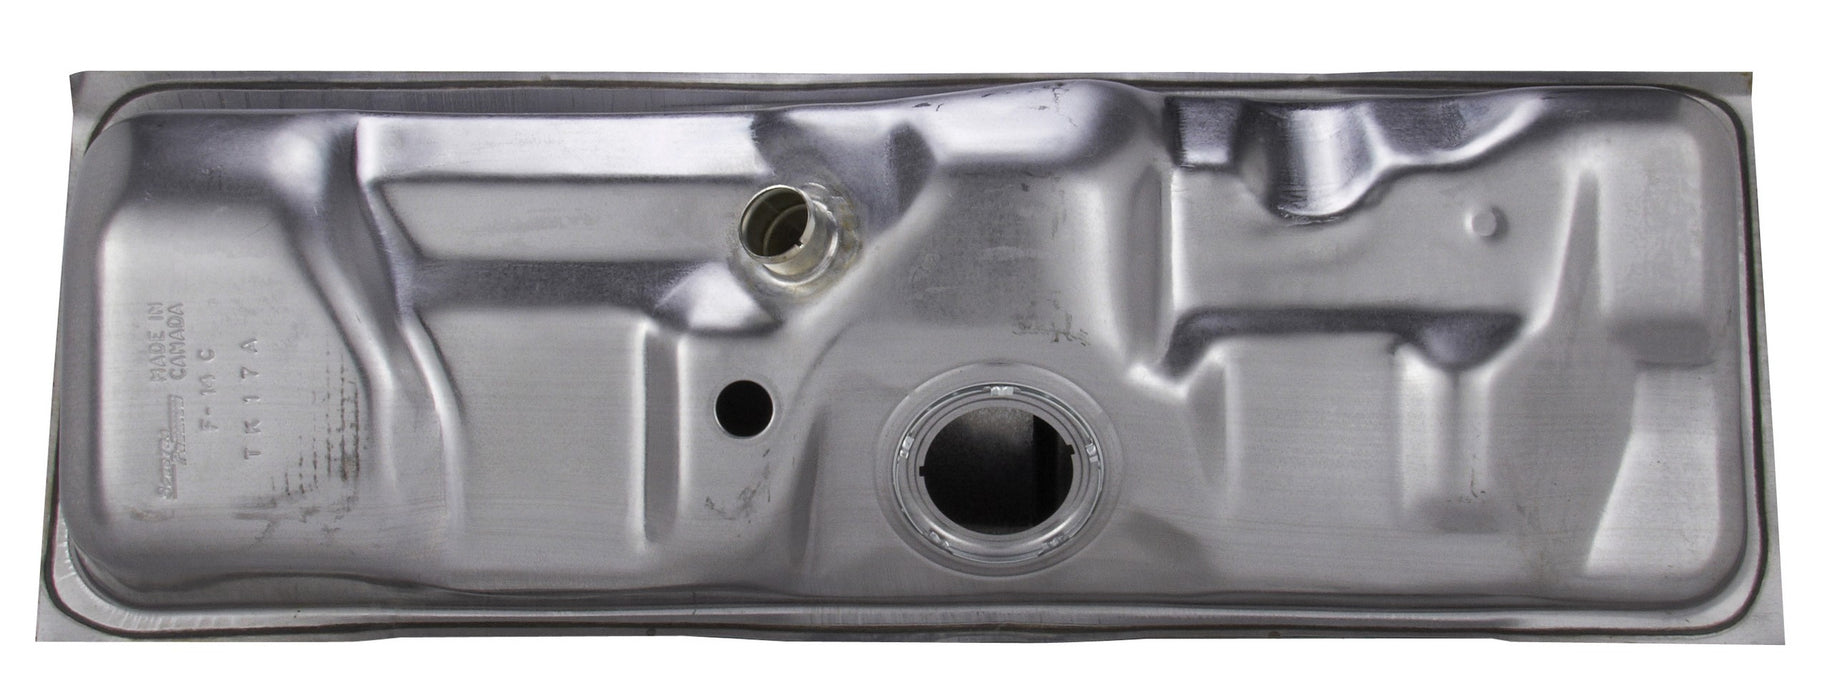 Fuel Tank for Ford F-350 1998 1997 1996 1995 1994 1993 1992 1991 1990 - Spectra F14C